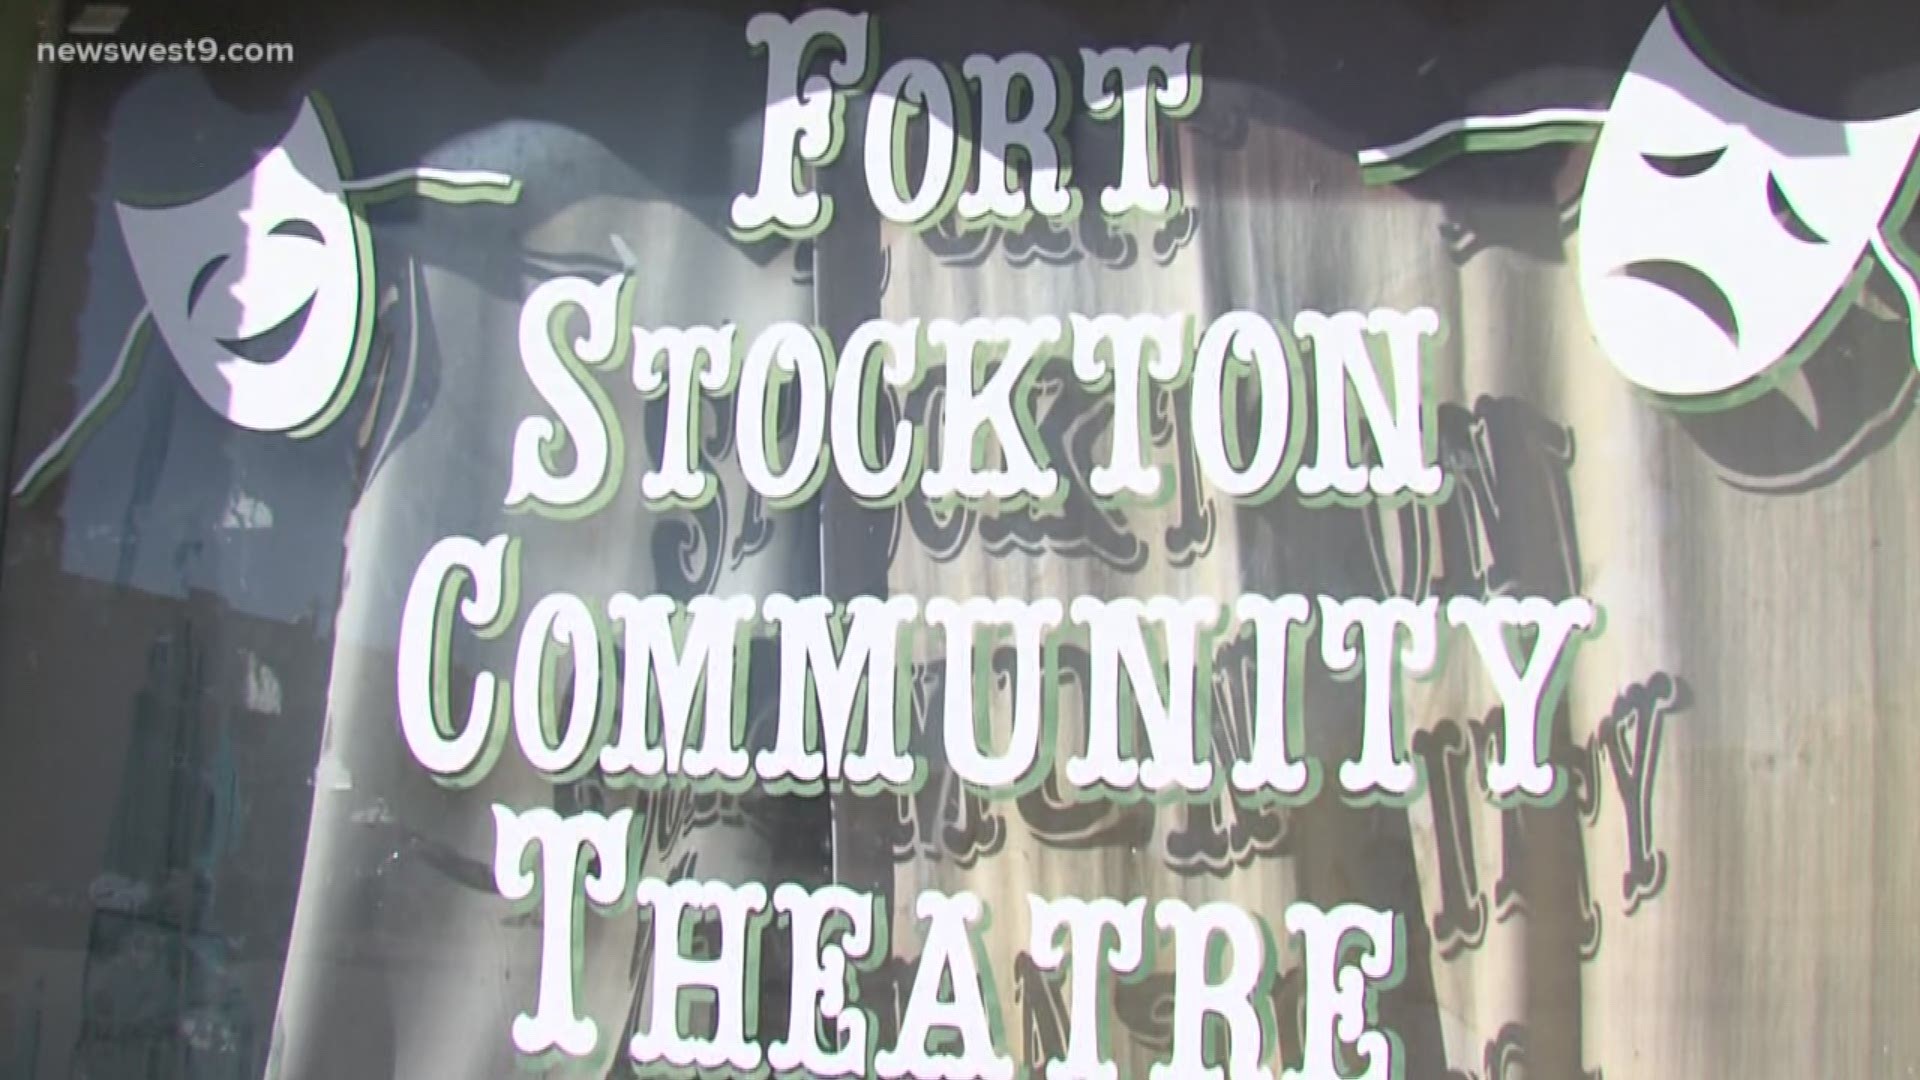 Tenor UnLimited will be performing in Fort Stockton to help the theater gather the funds.